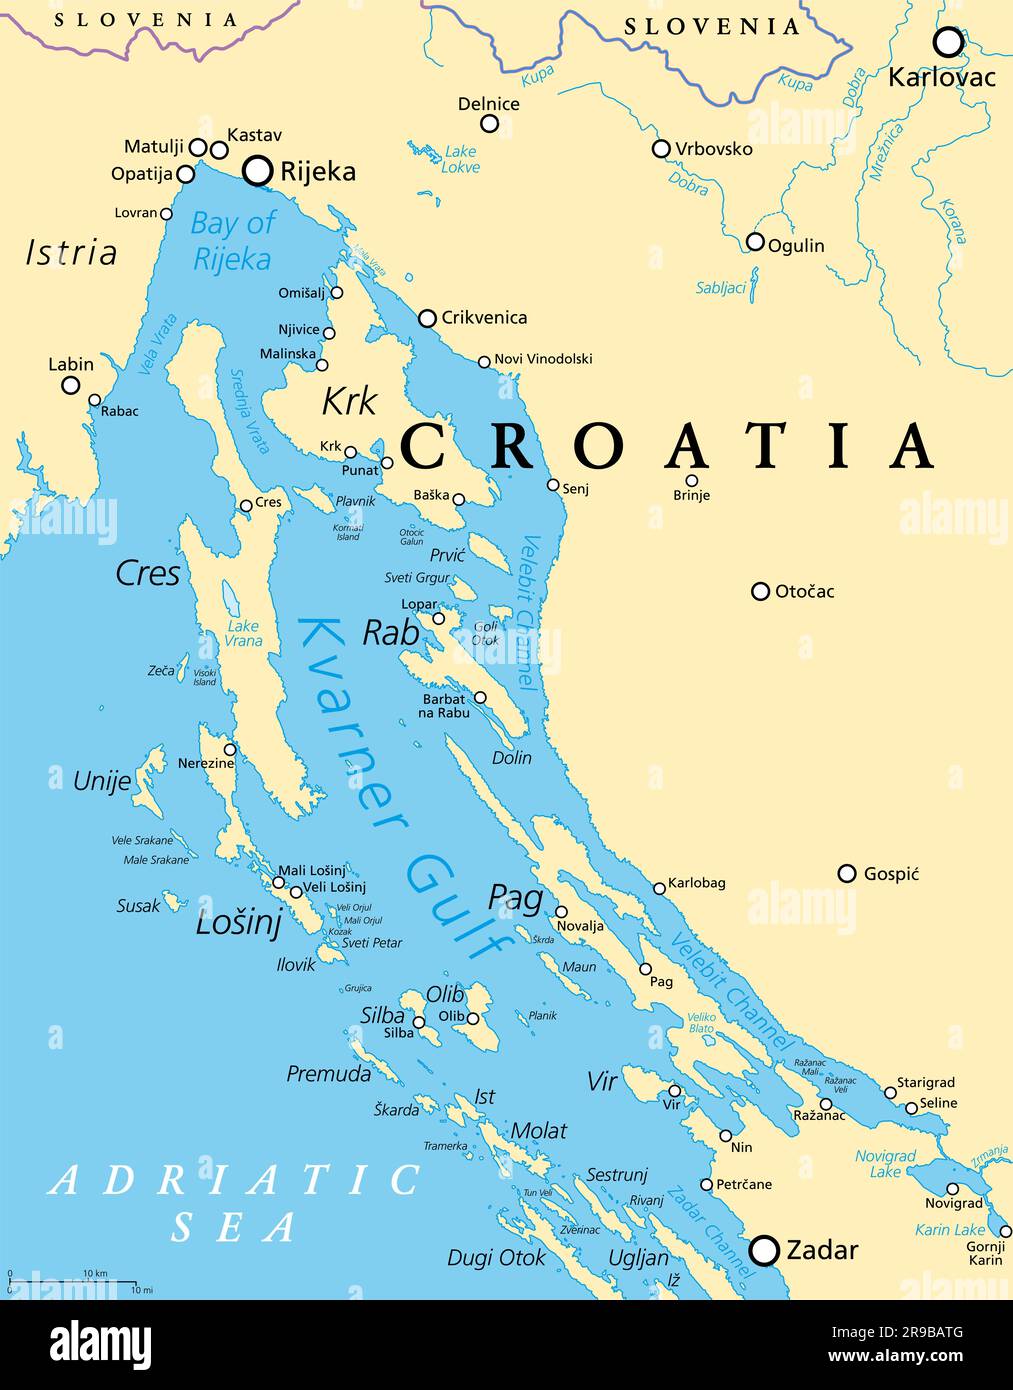 Kvarner Gulf, part of internal waters of Croatia, political map. Also known as Kvarner Bay, in the northern Adriatic Sea. Stock Photo